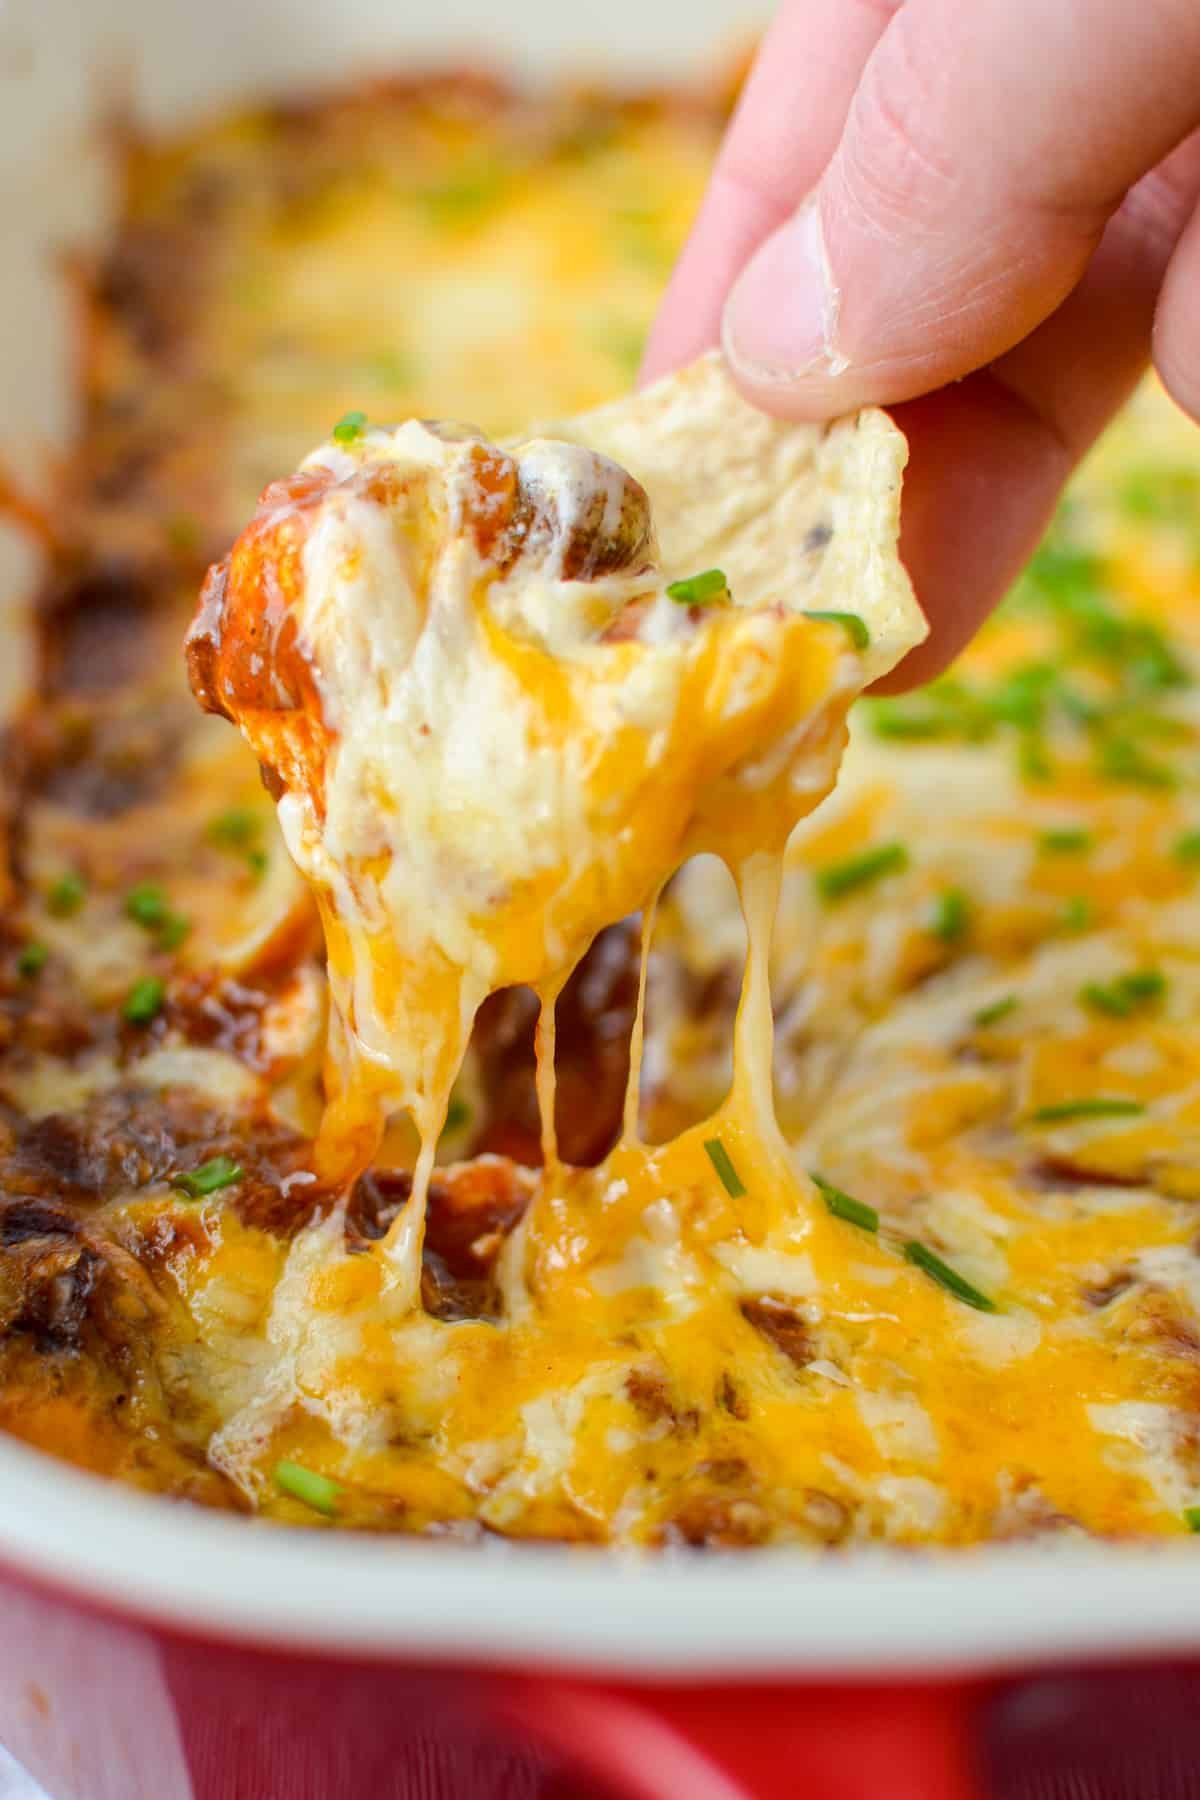 Dipping a scoop tortilla chip into a cheesy dip.